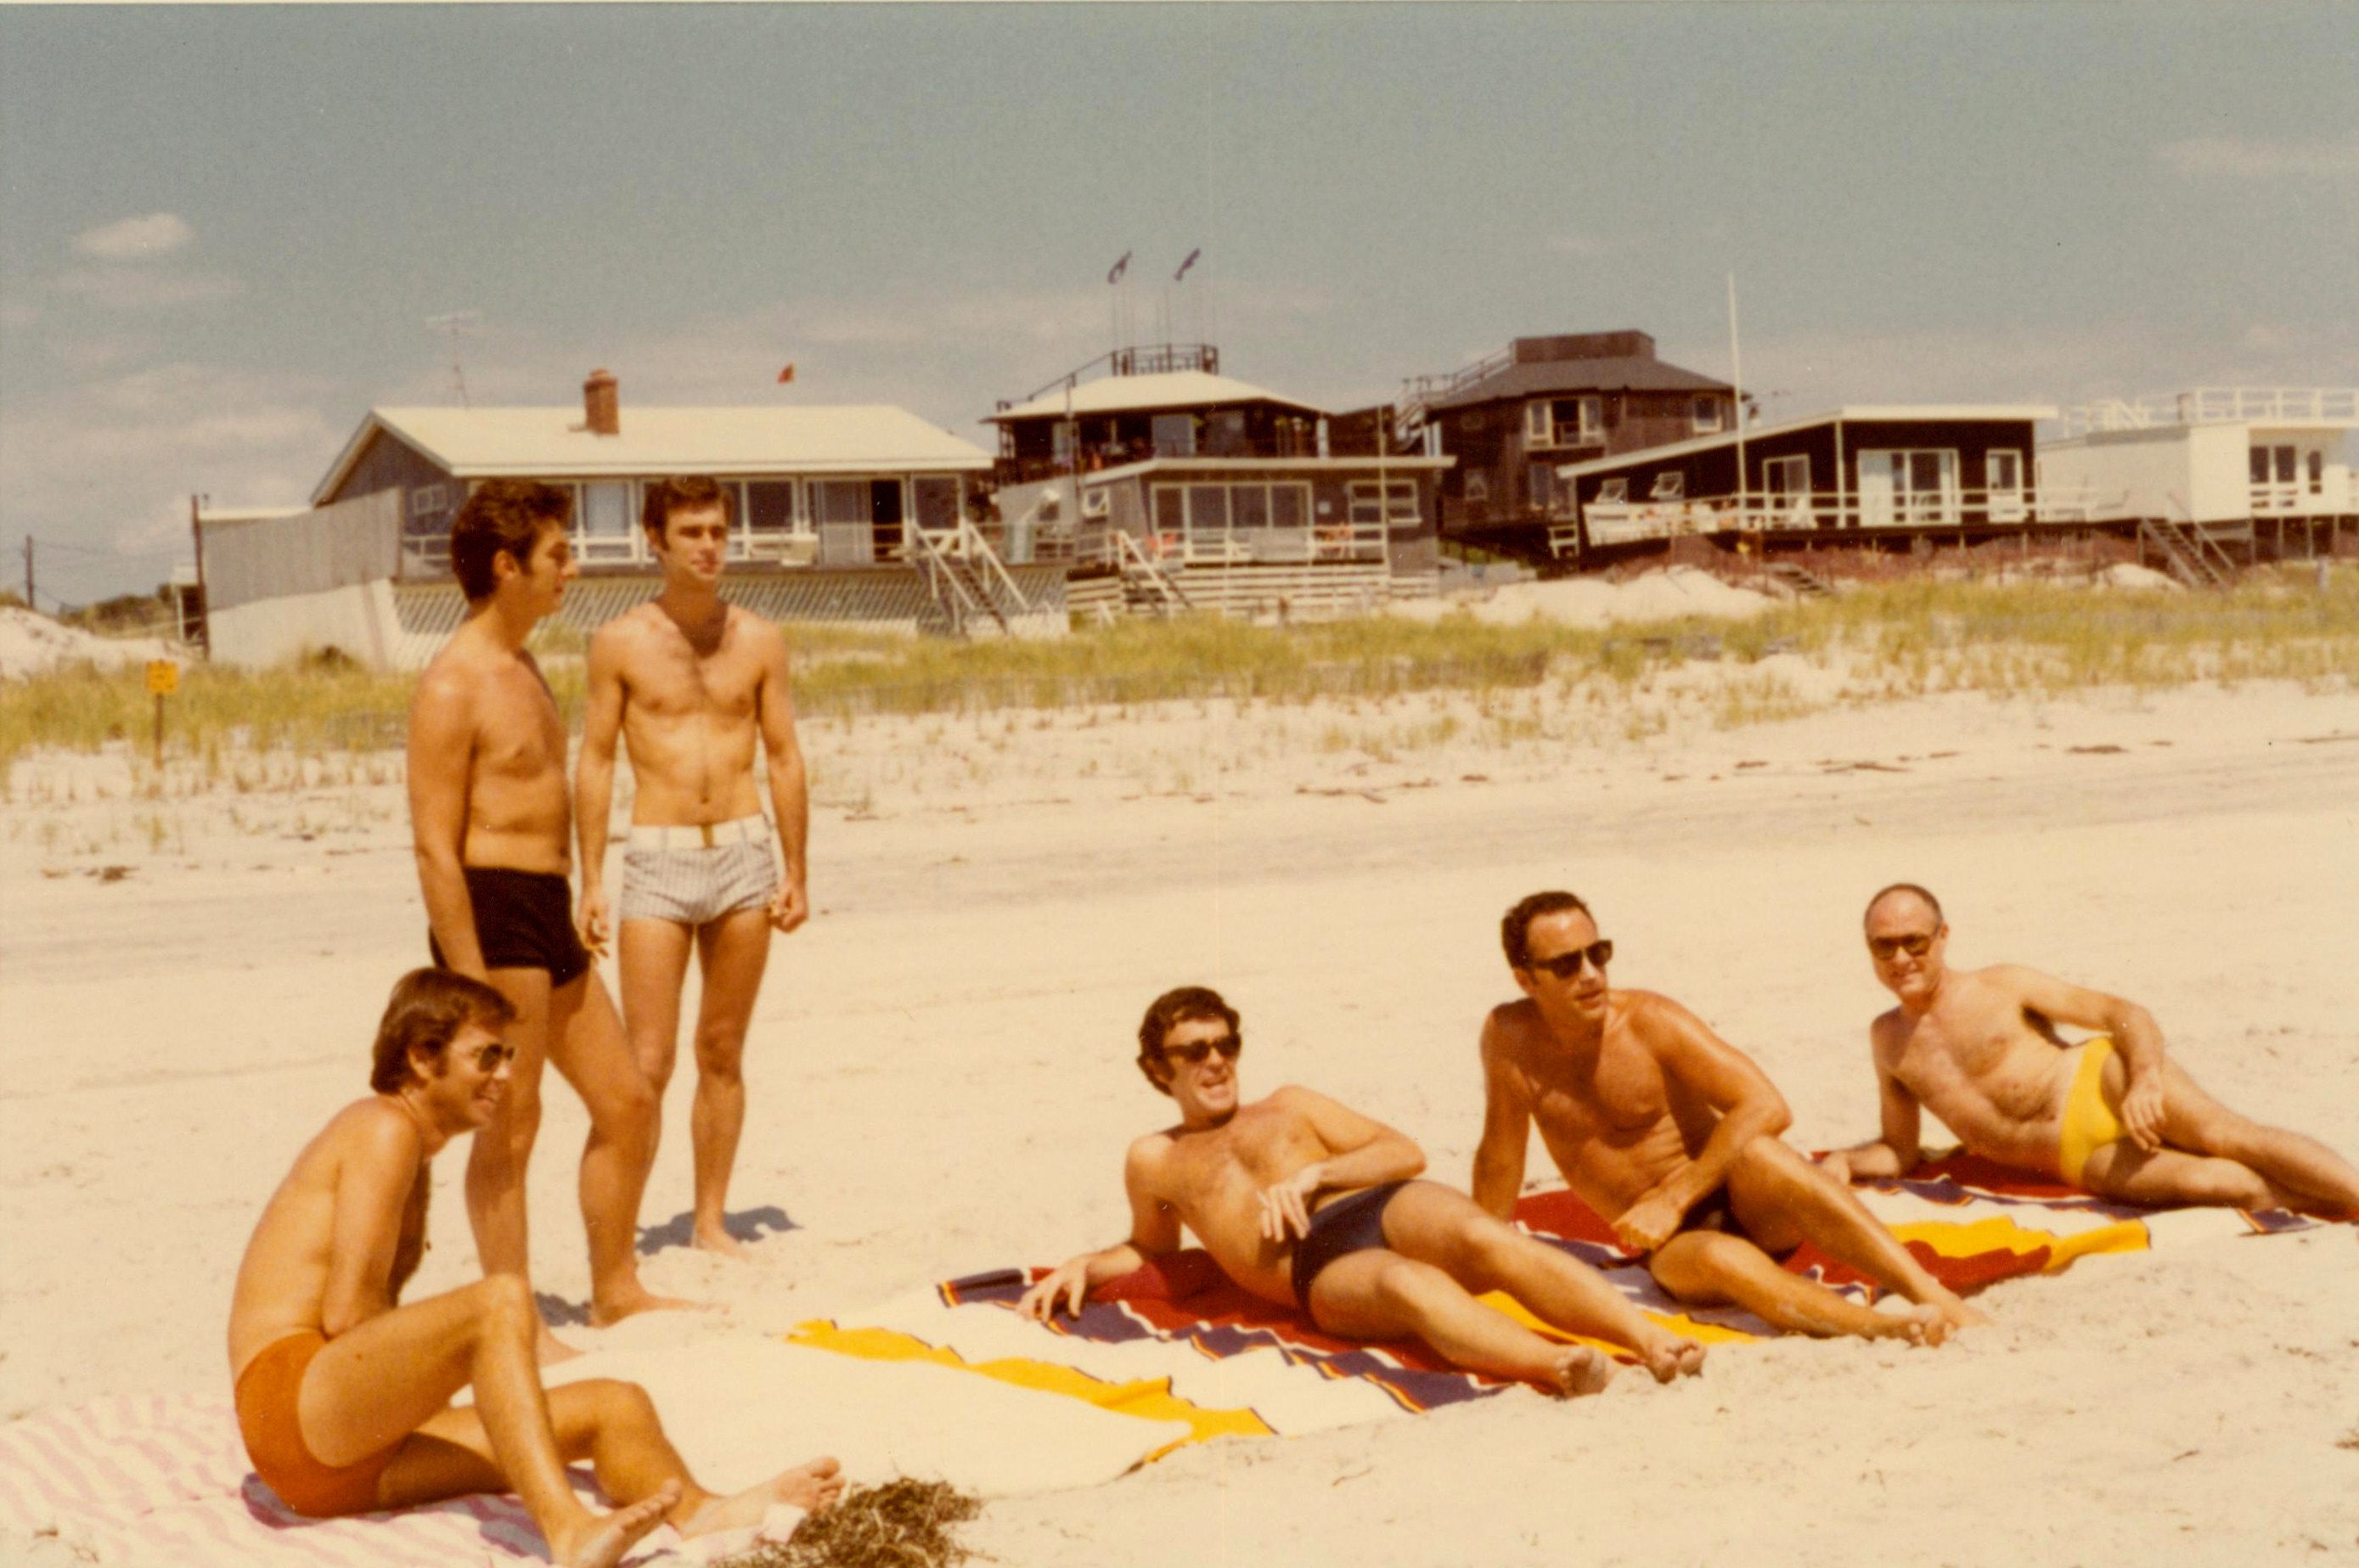 Men enjoy the beach on Fire Island, in 1970. The sandy stretch of land off New York has barely changed since it emerged as an LGBTQ refuge in the 1950s. Photo: Fire Island Pines Historical Preservation Society